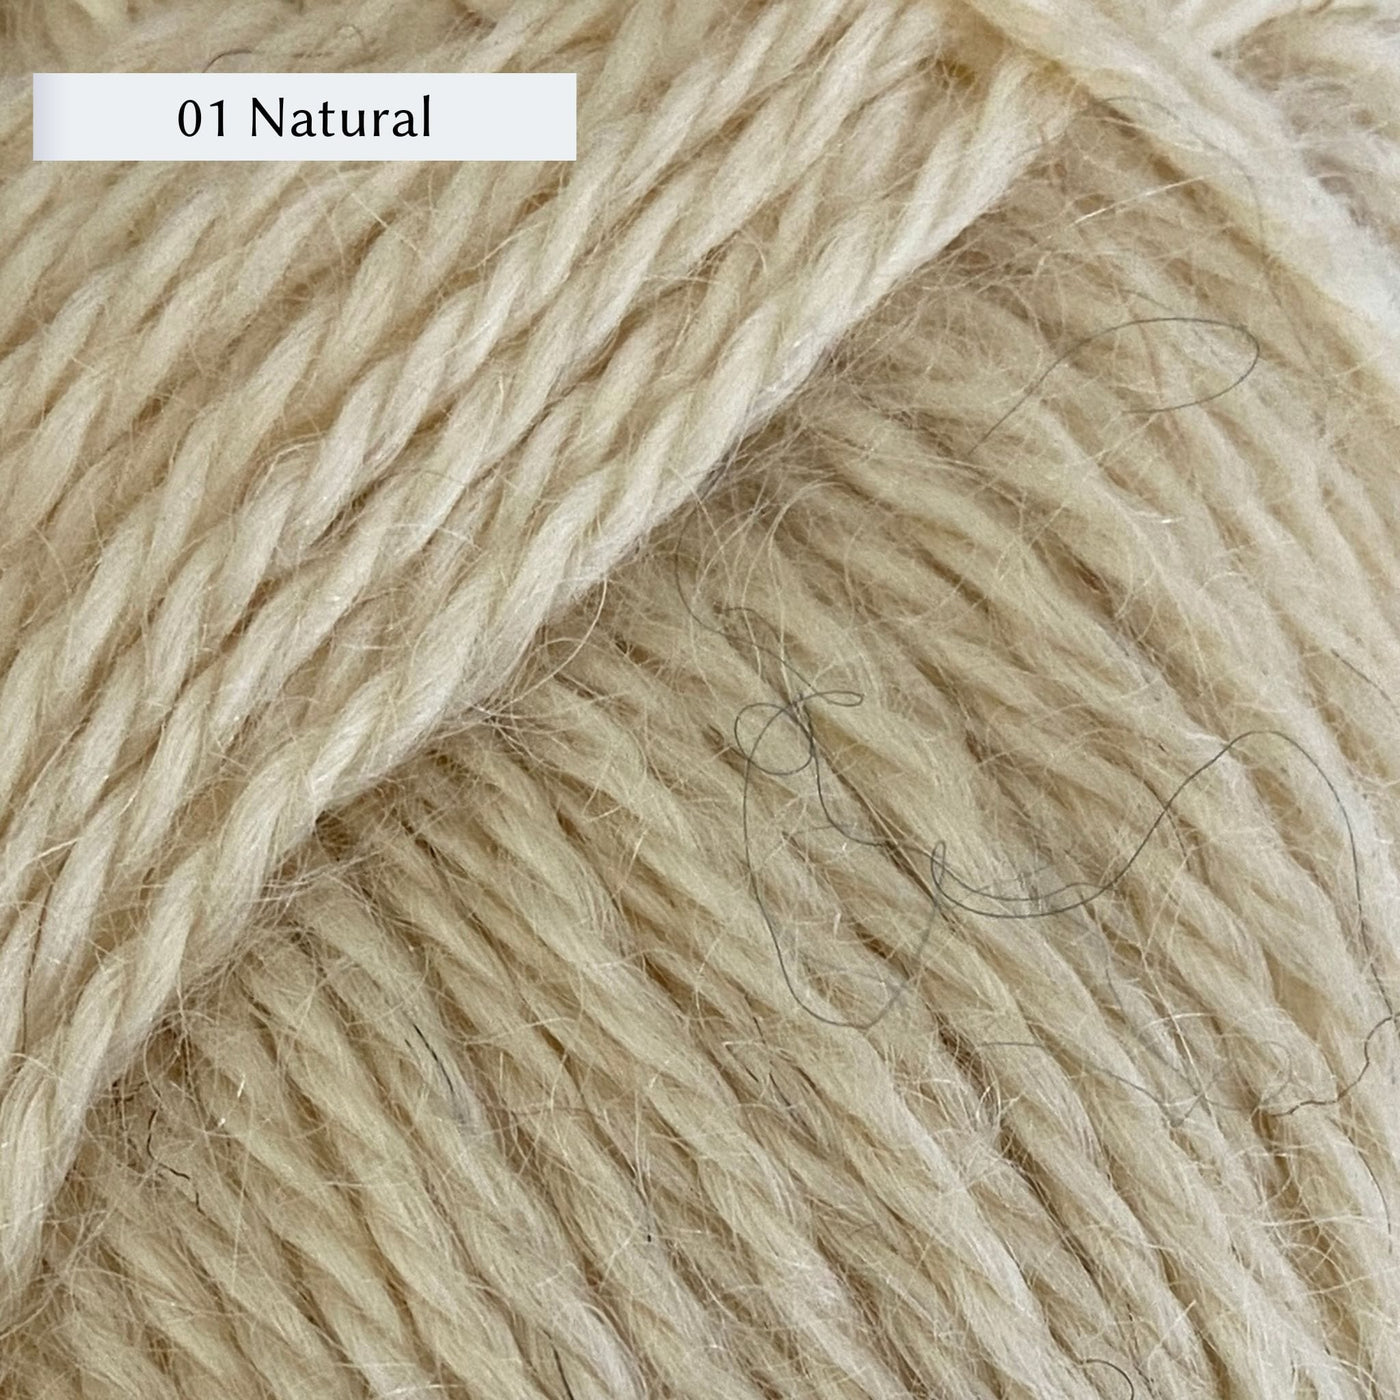 Wensleydale Longwool Aran, an aran weight yarn made from Wensleydale sheep, in color 01 Natural, a natural cream